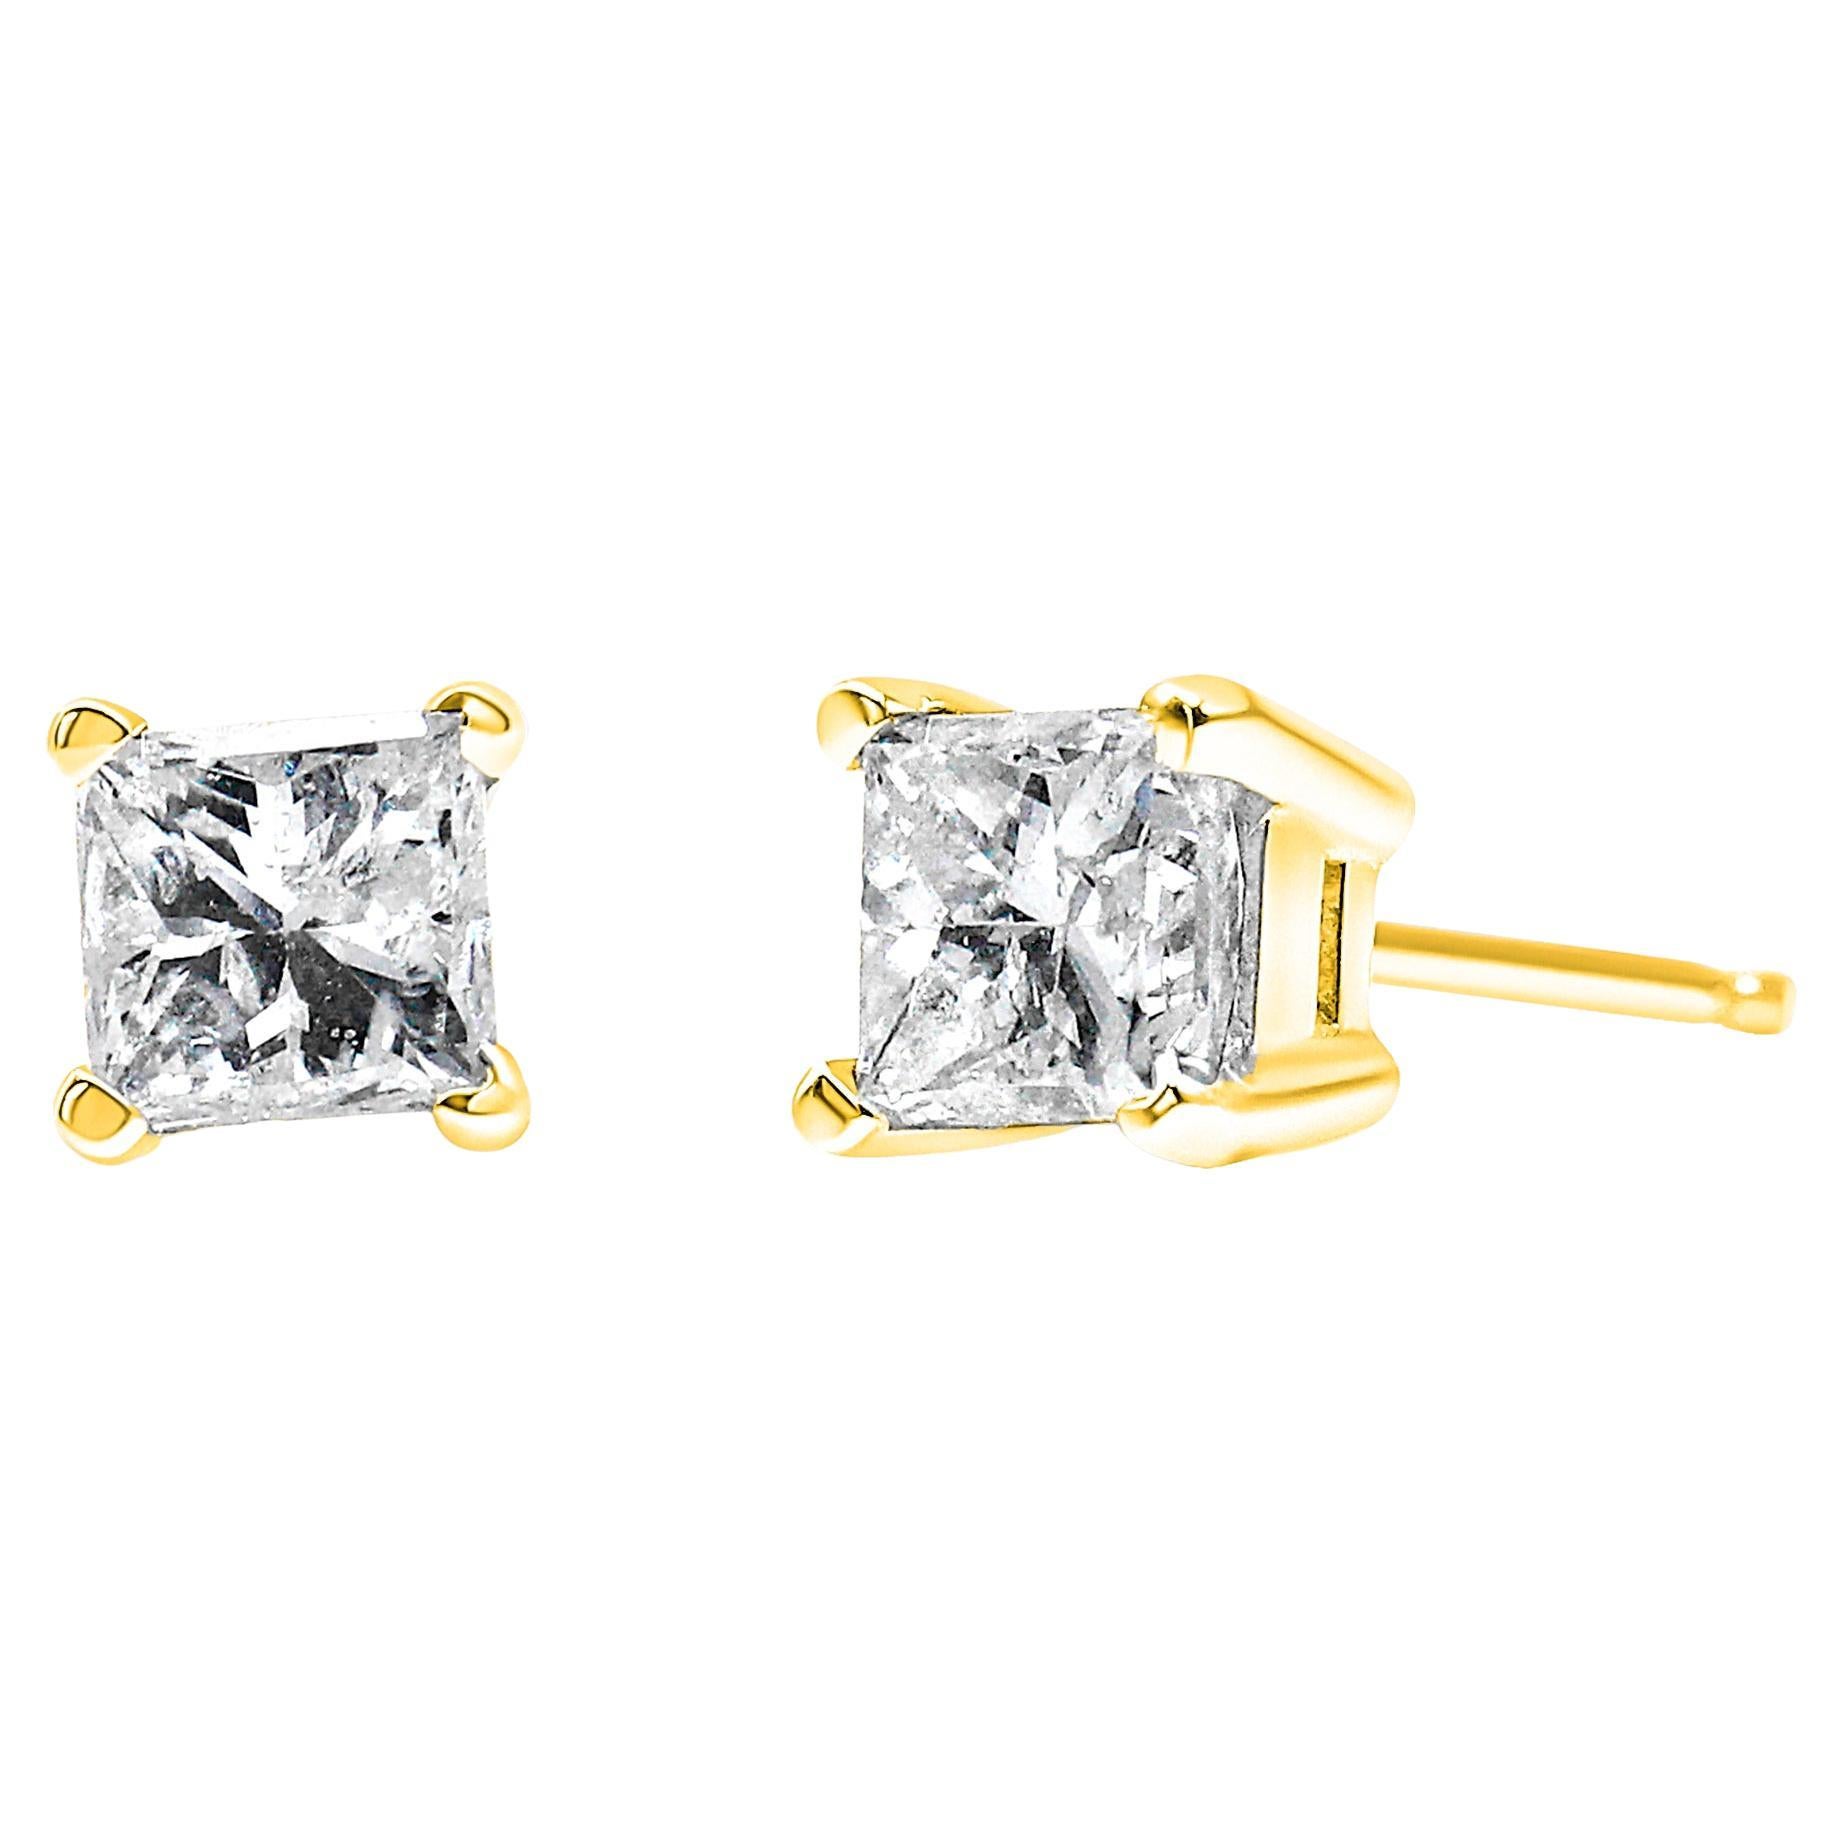 14K Yellow Gold 3/8 Carat Square Diamond Classic Solitaire Stud Earrings